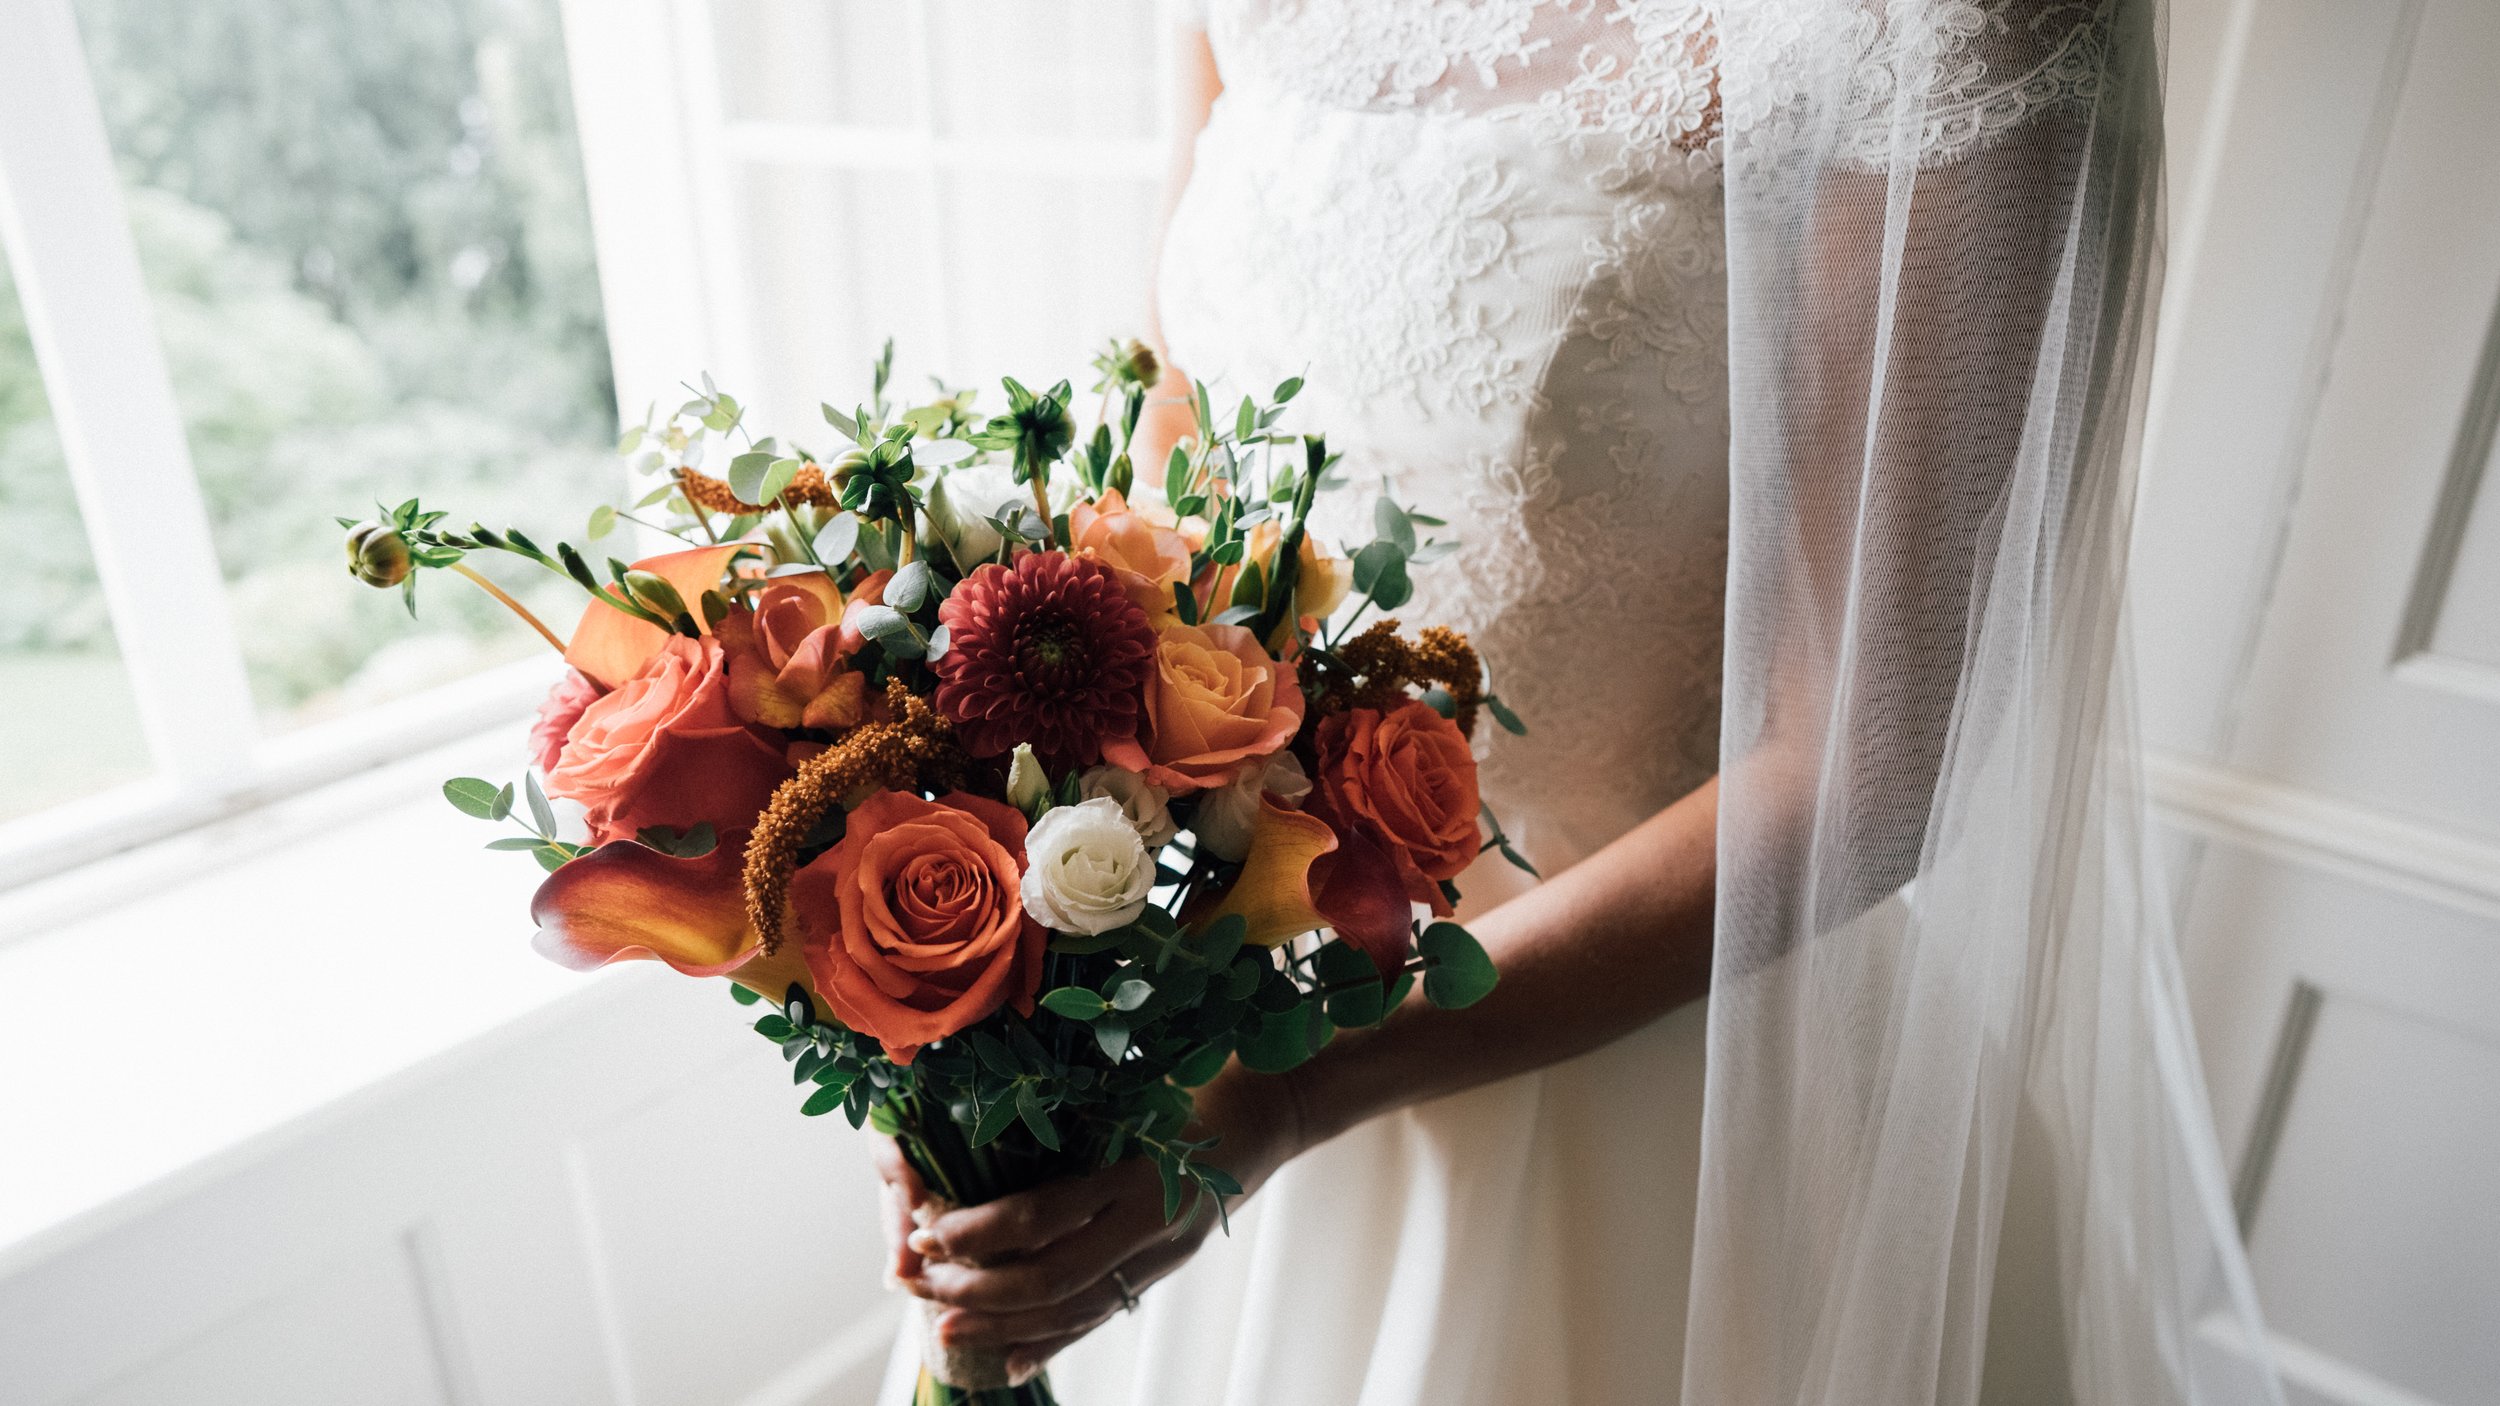 Stunning late summer bridal bouquet, by Sarah Glanville at Hyde Park Florist in Plymouth.jpg